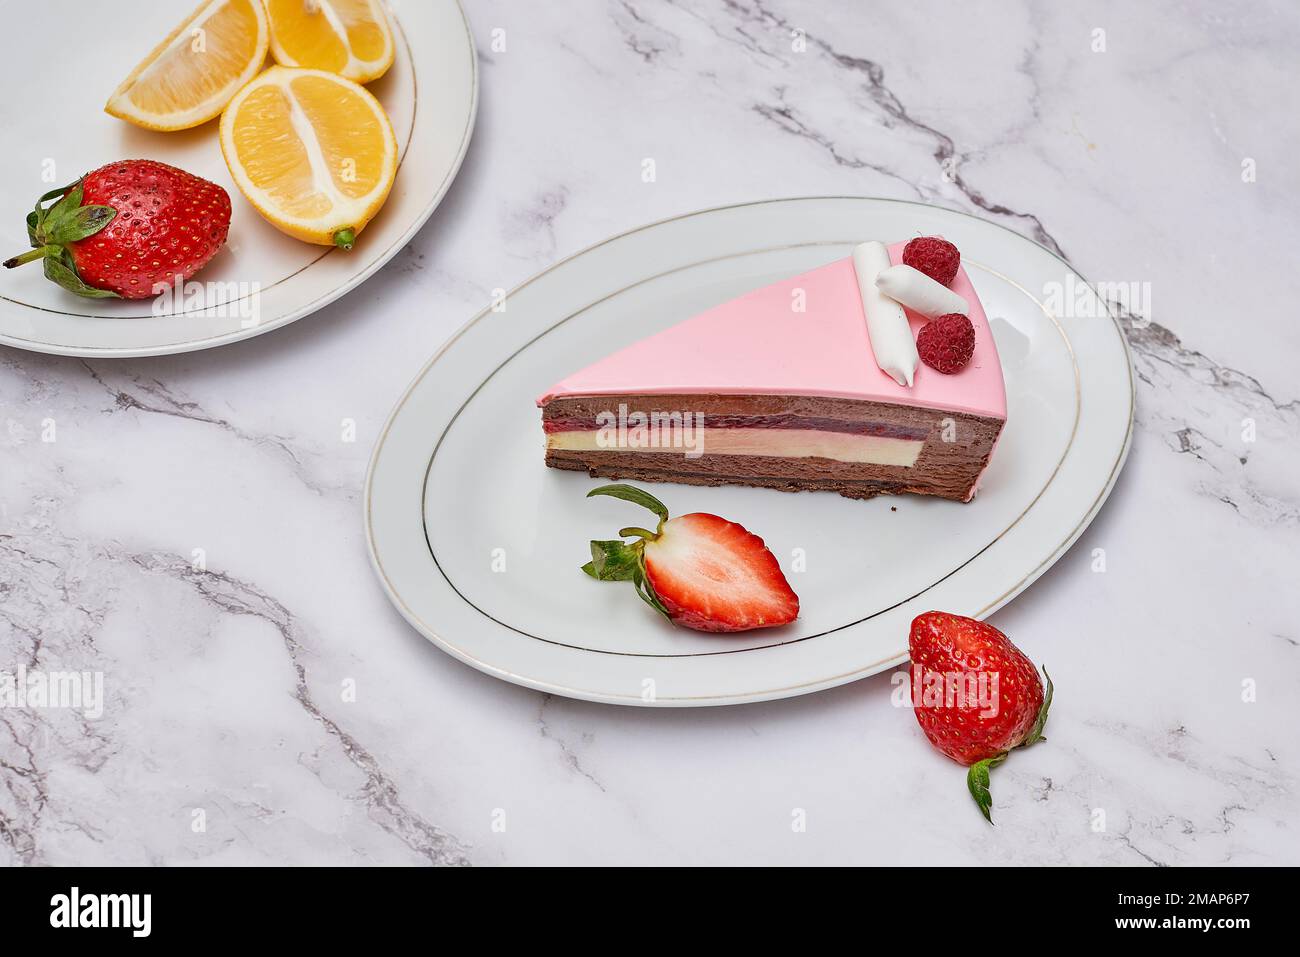 two slices of cake with strawberries and lemons on the plate next to each one slice is half eaten Stock Photo